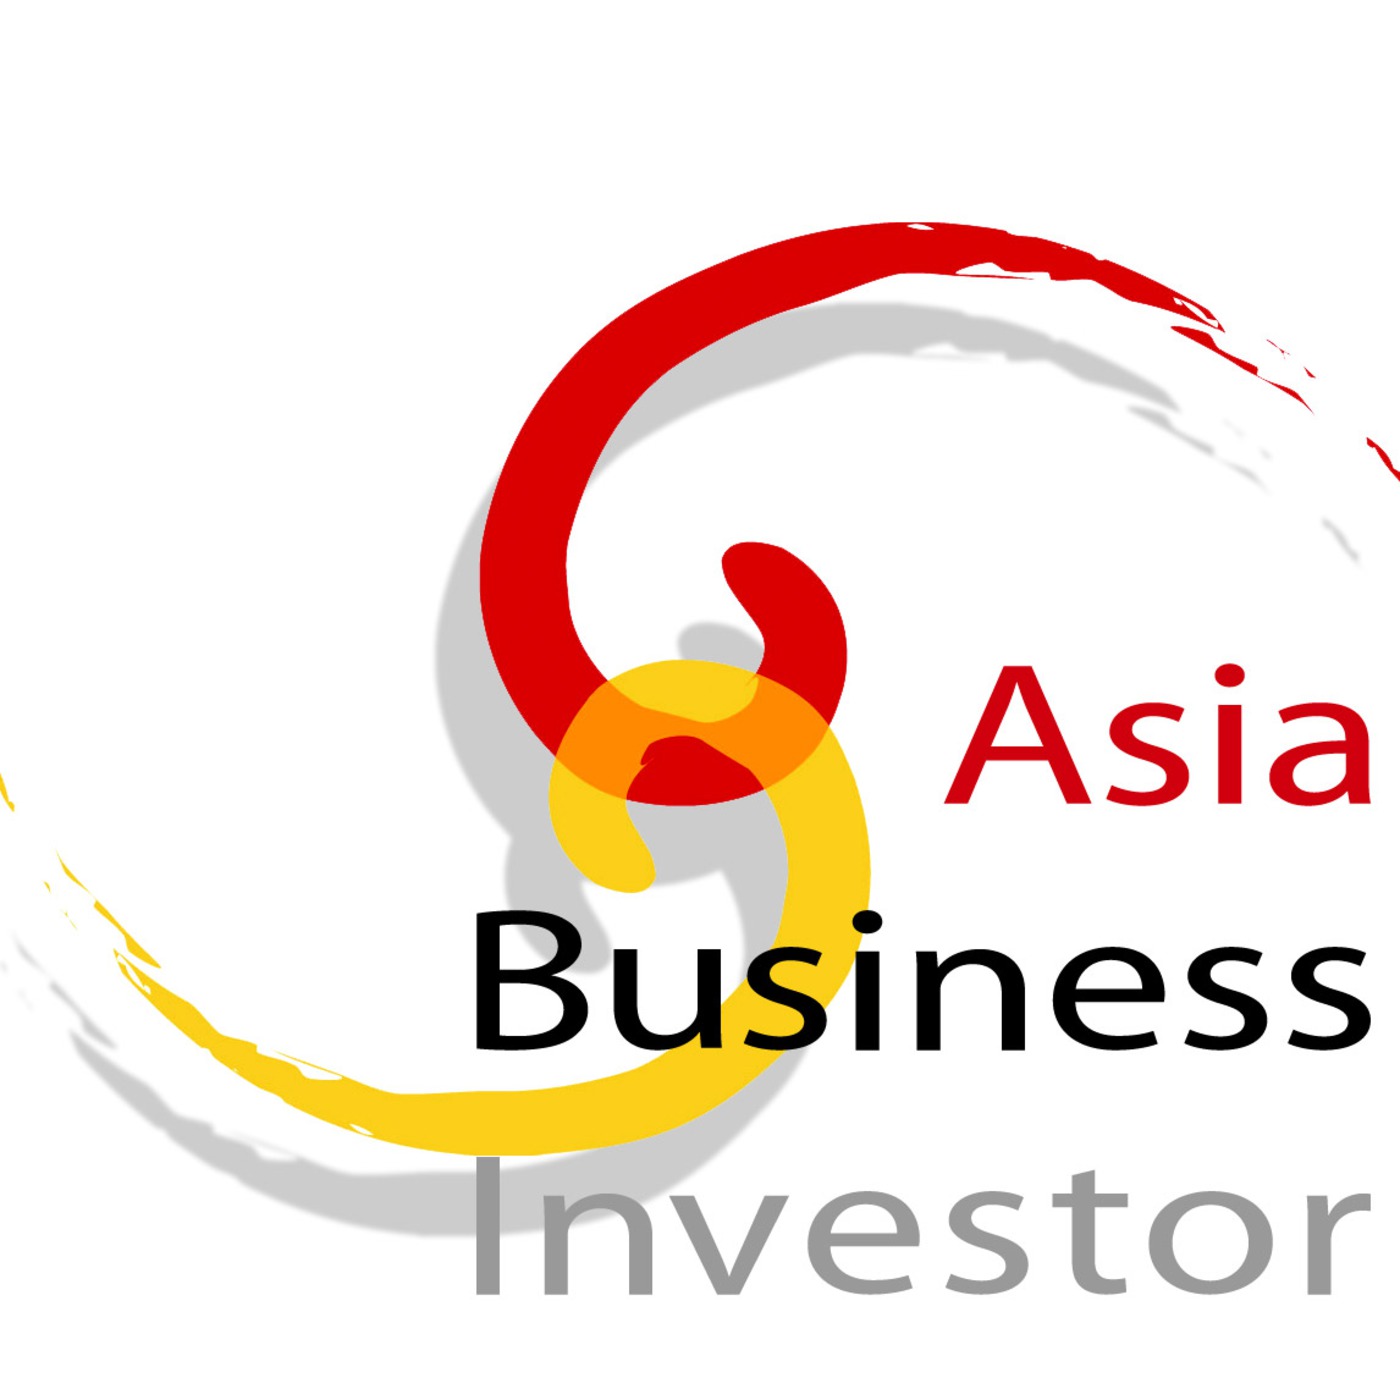 The Asia Business Investor Podcast